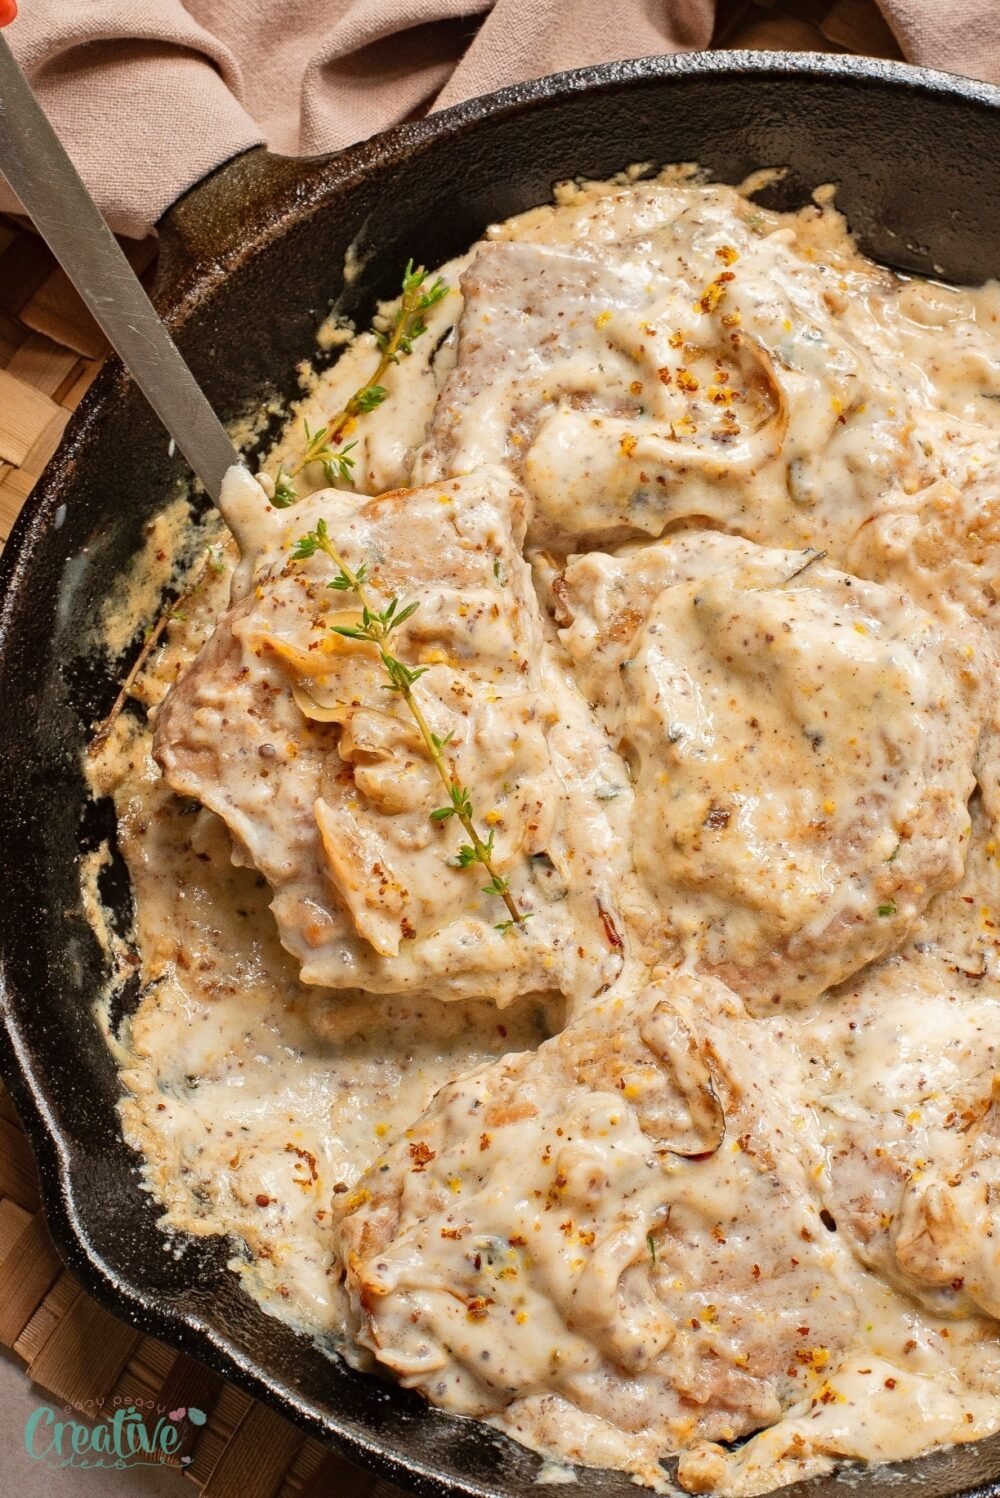 Pork loin in creamy mustard sauce - a flavorful and satisfying dish you don't want to miss!